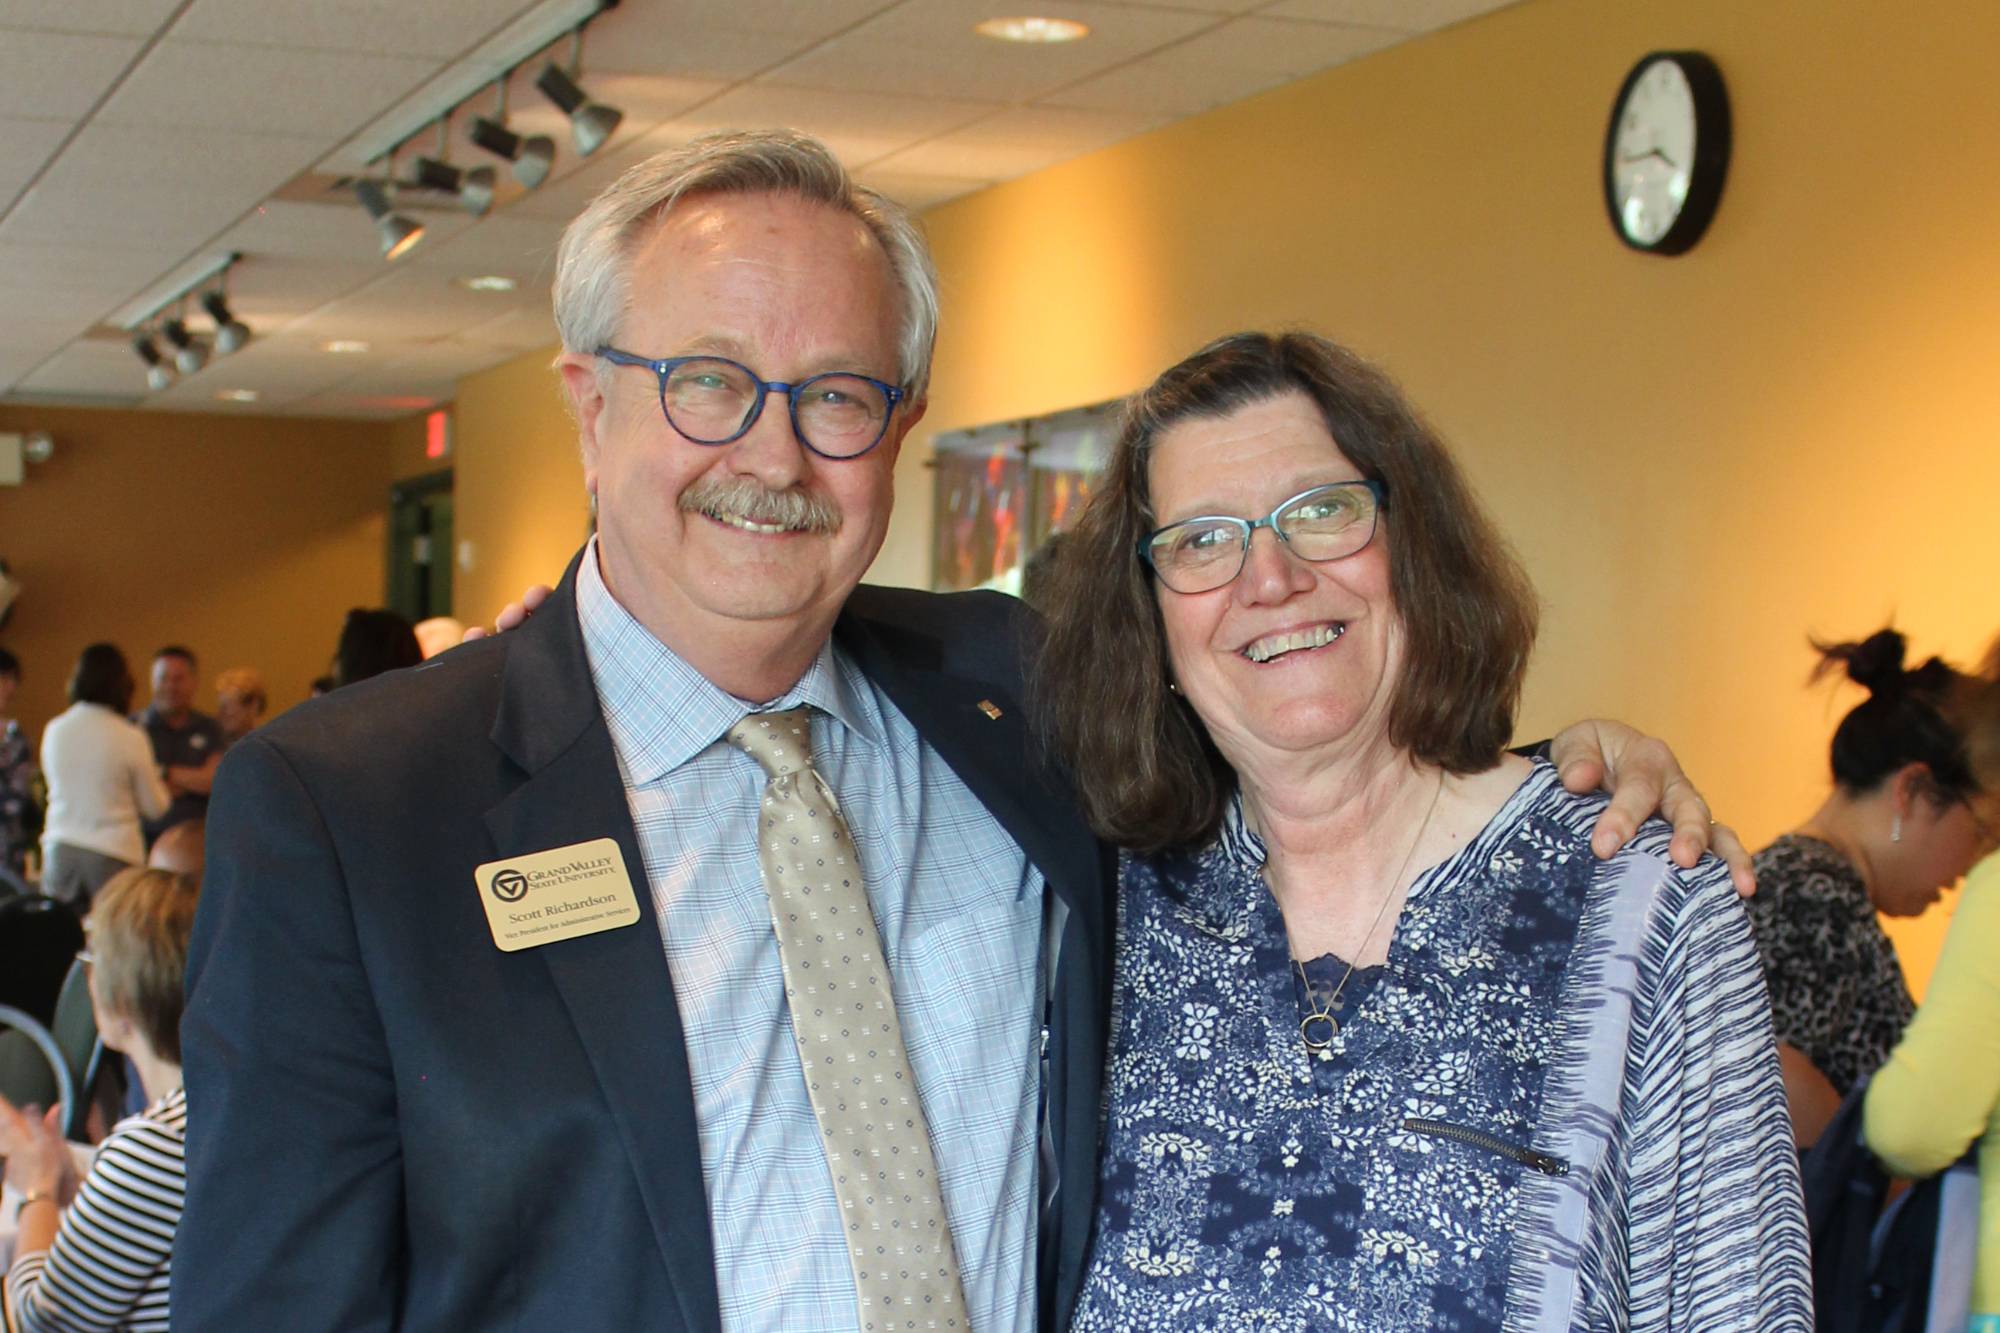 Retiree Connection with Scott Richardson and Bonnie Maka